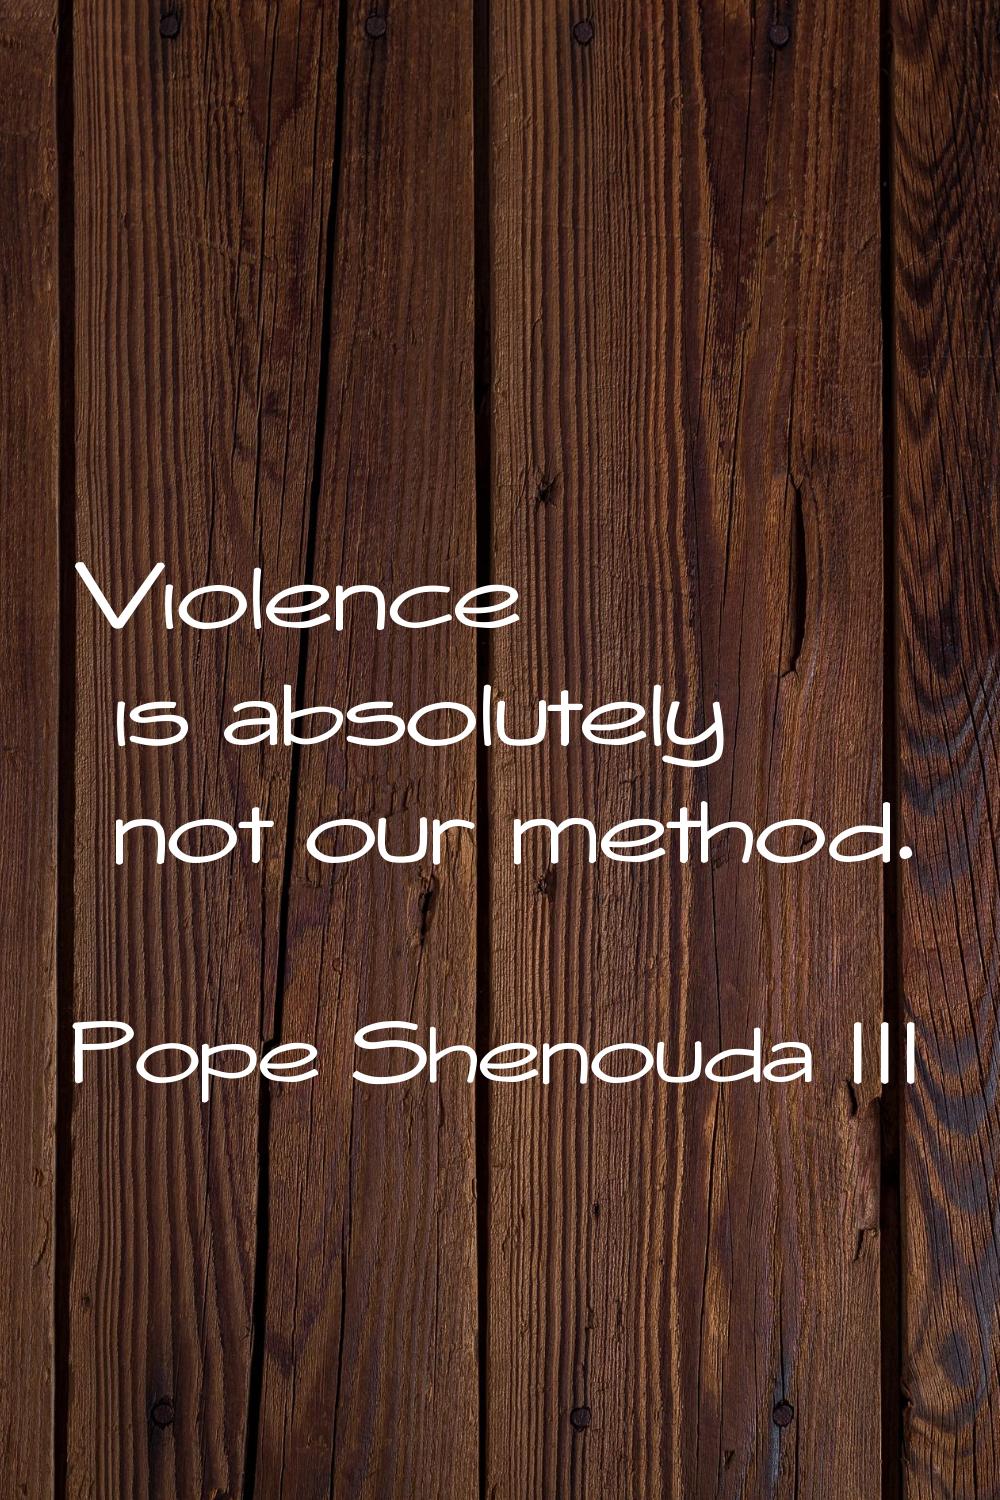 Violence is absolutely not our method.